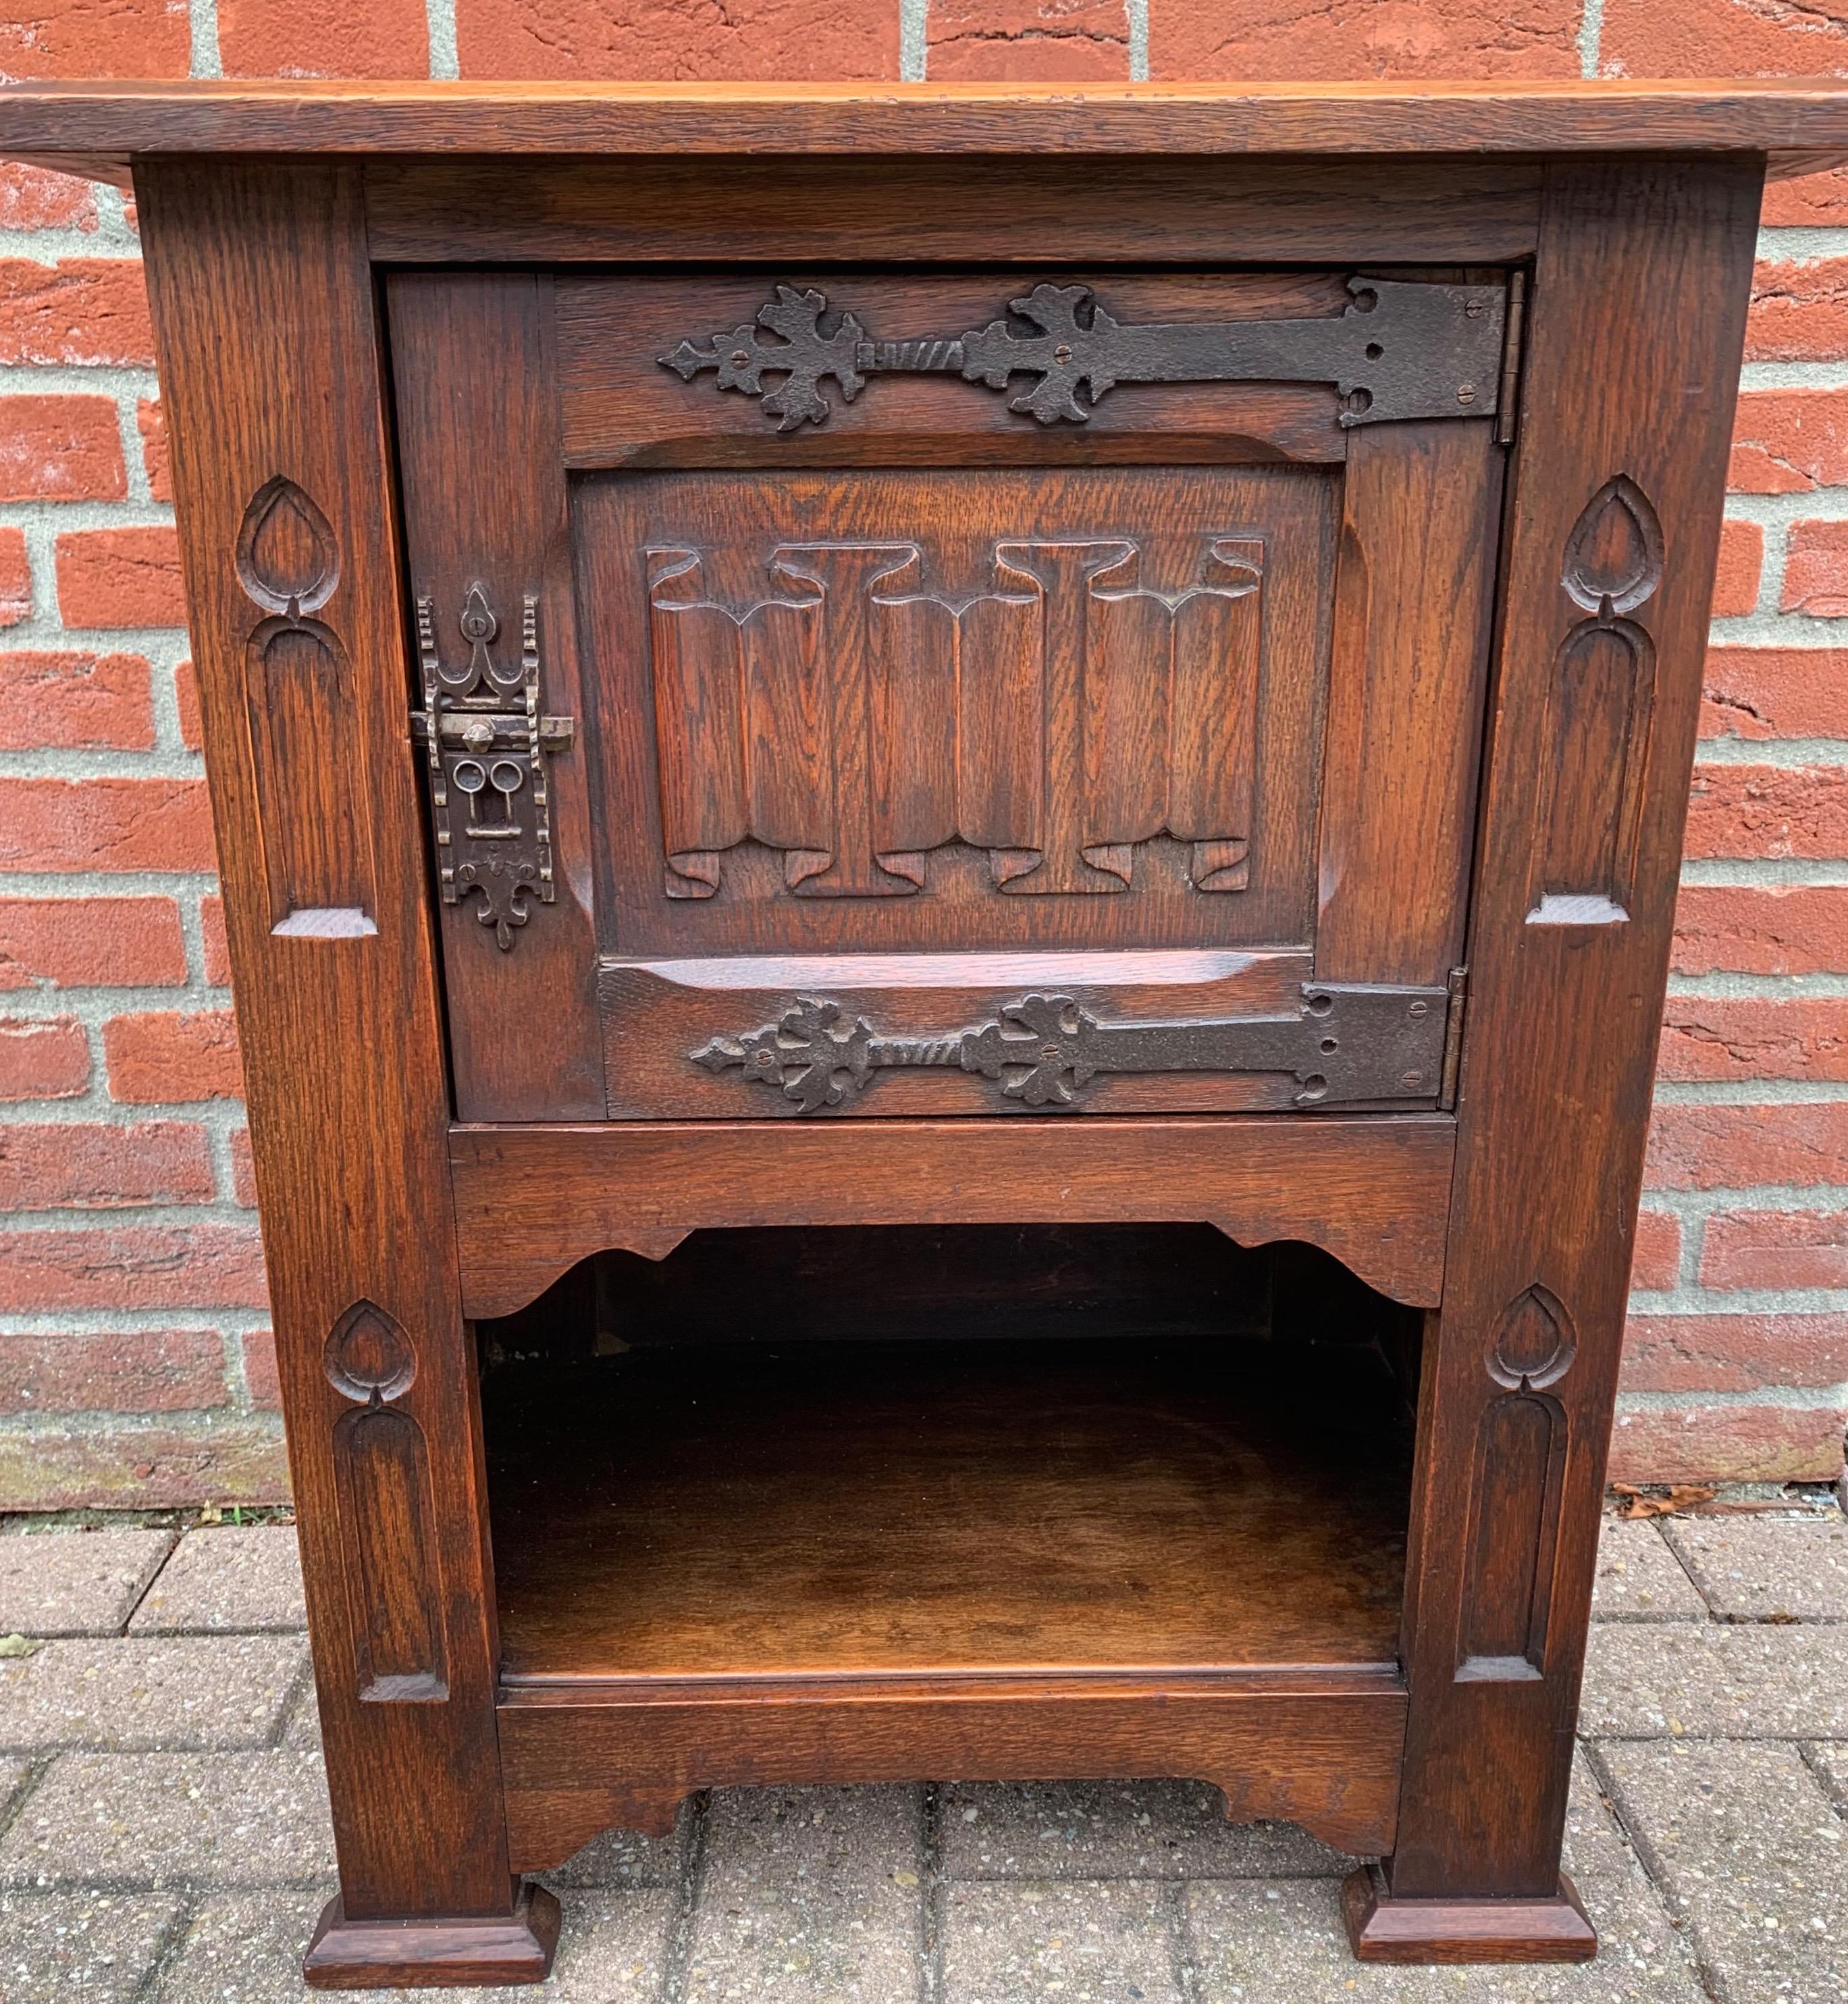 Midcentury made, tiger oak Gothic cabinet.

This practical size and beautifully carved tiger oak cabinet from circa 1950 is in good condition. It comes with Fine quality details and you could not wish for a more attractive patina. This handcrafted